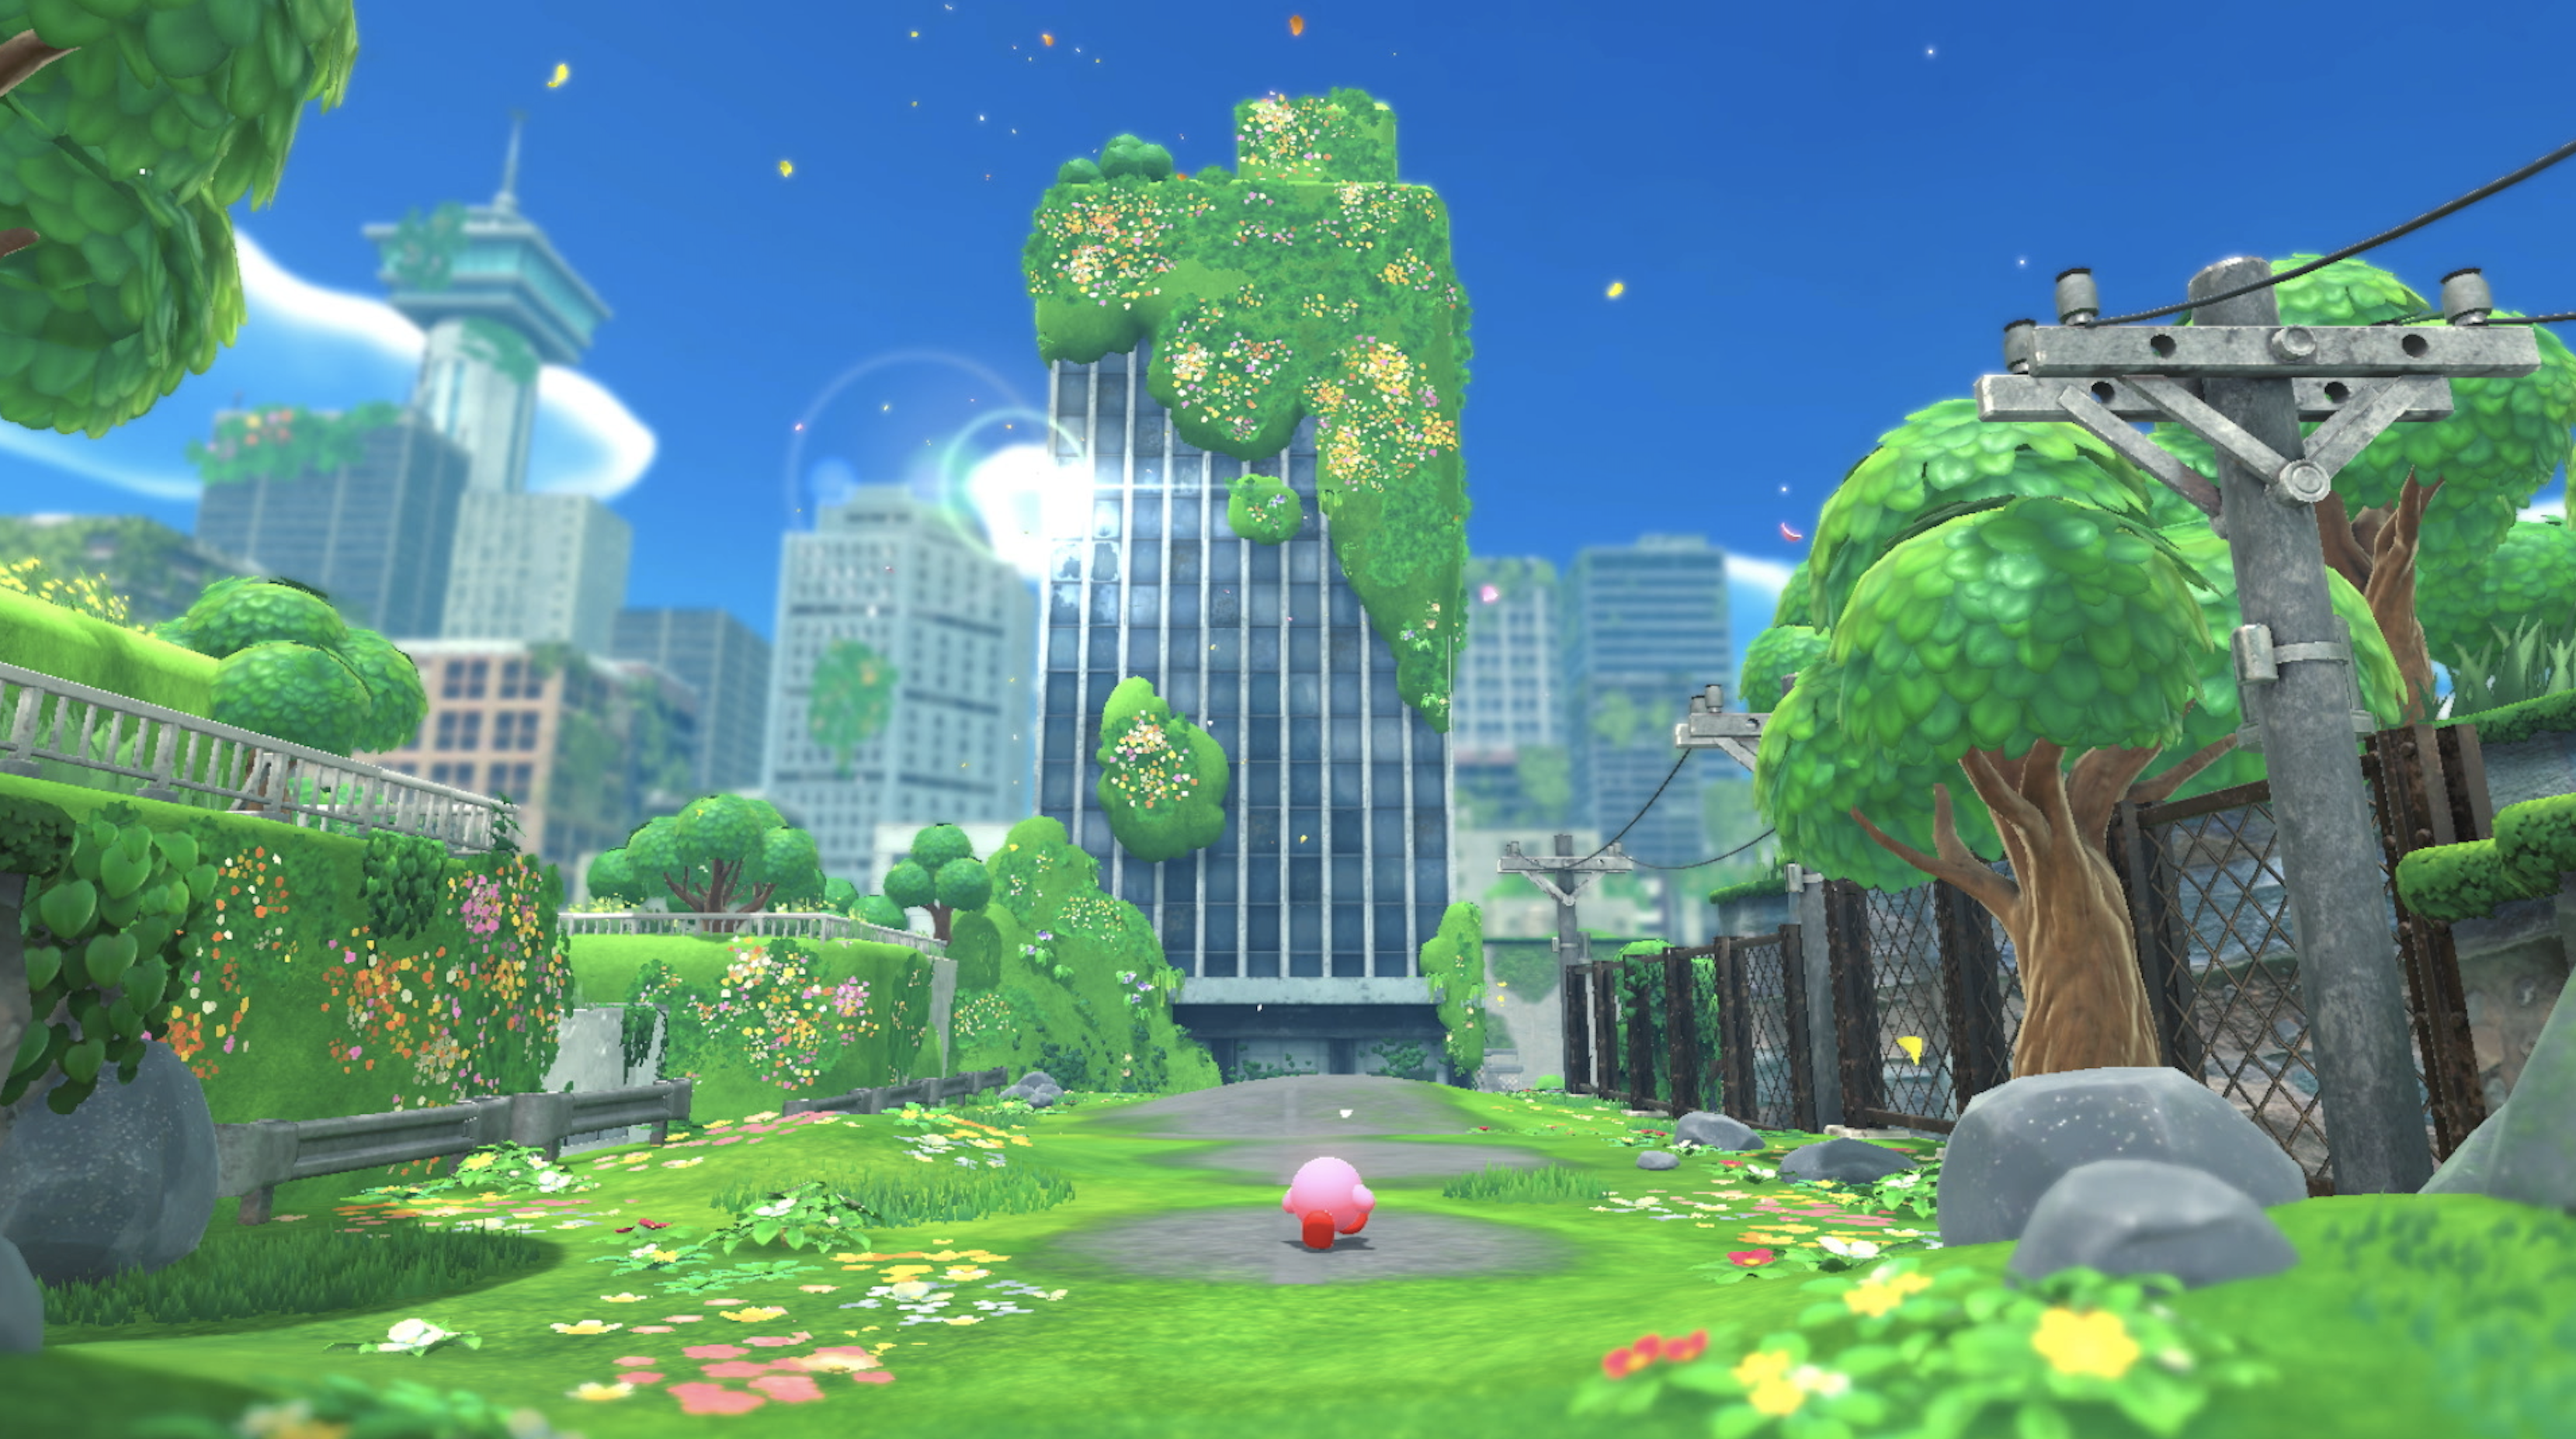 Video game image of a round, pink character walking into a city with skyscrapers covered in overgrown plants